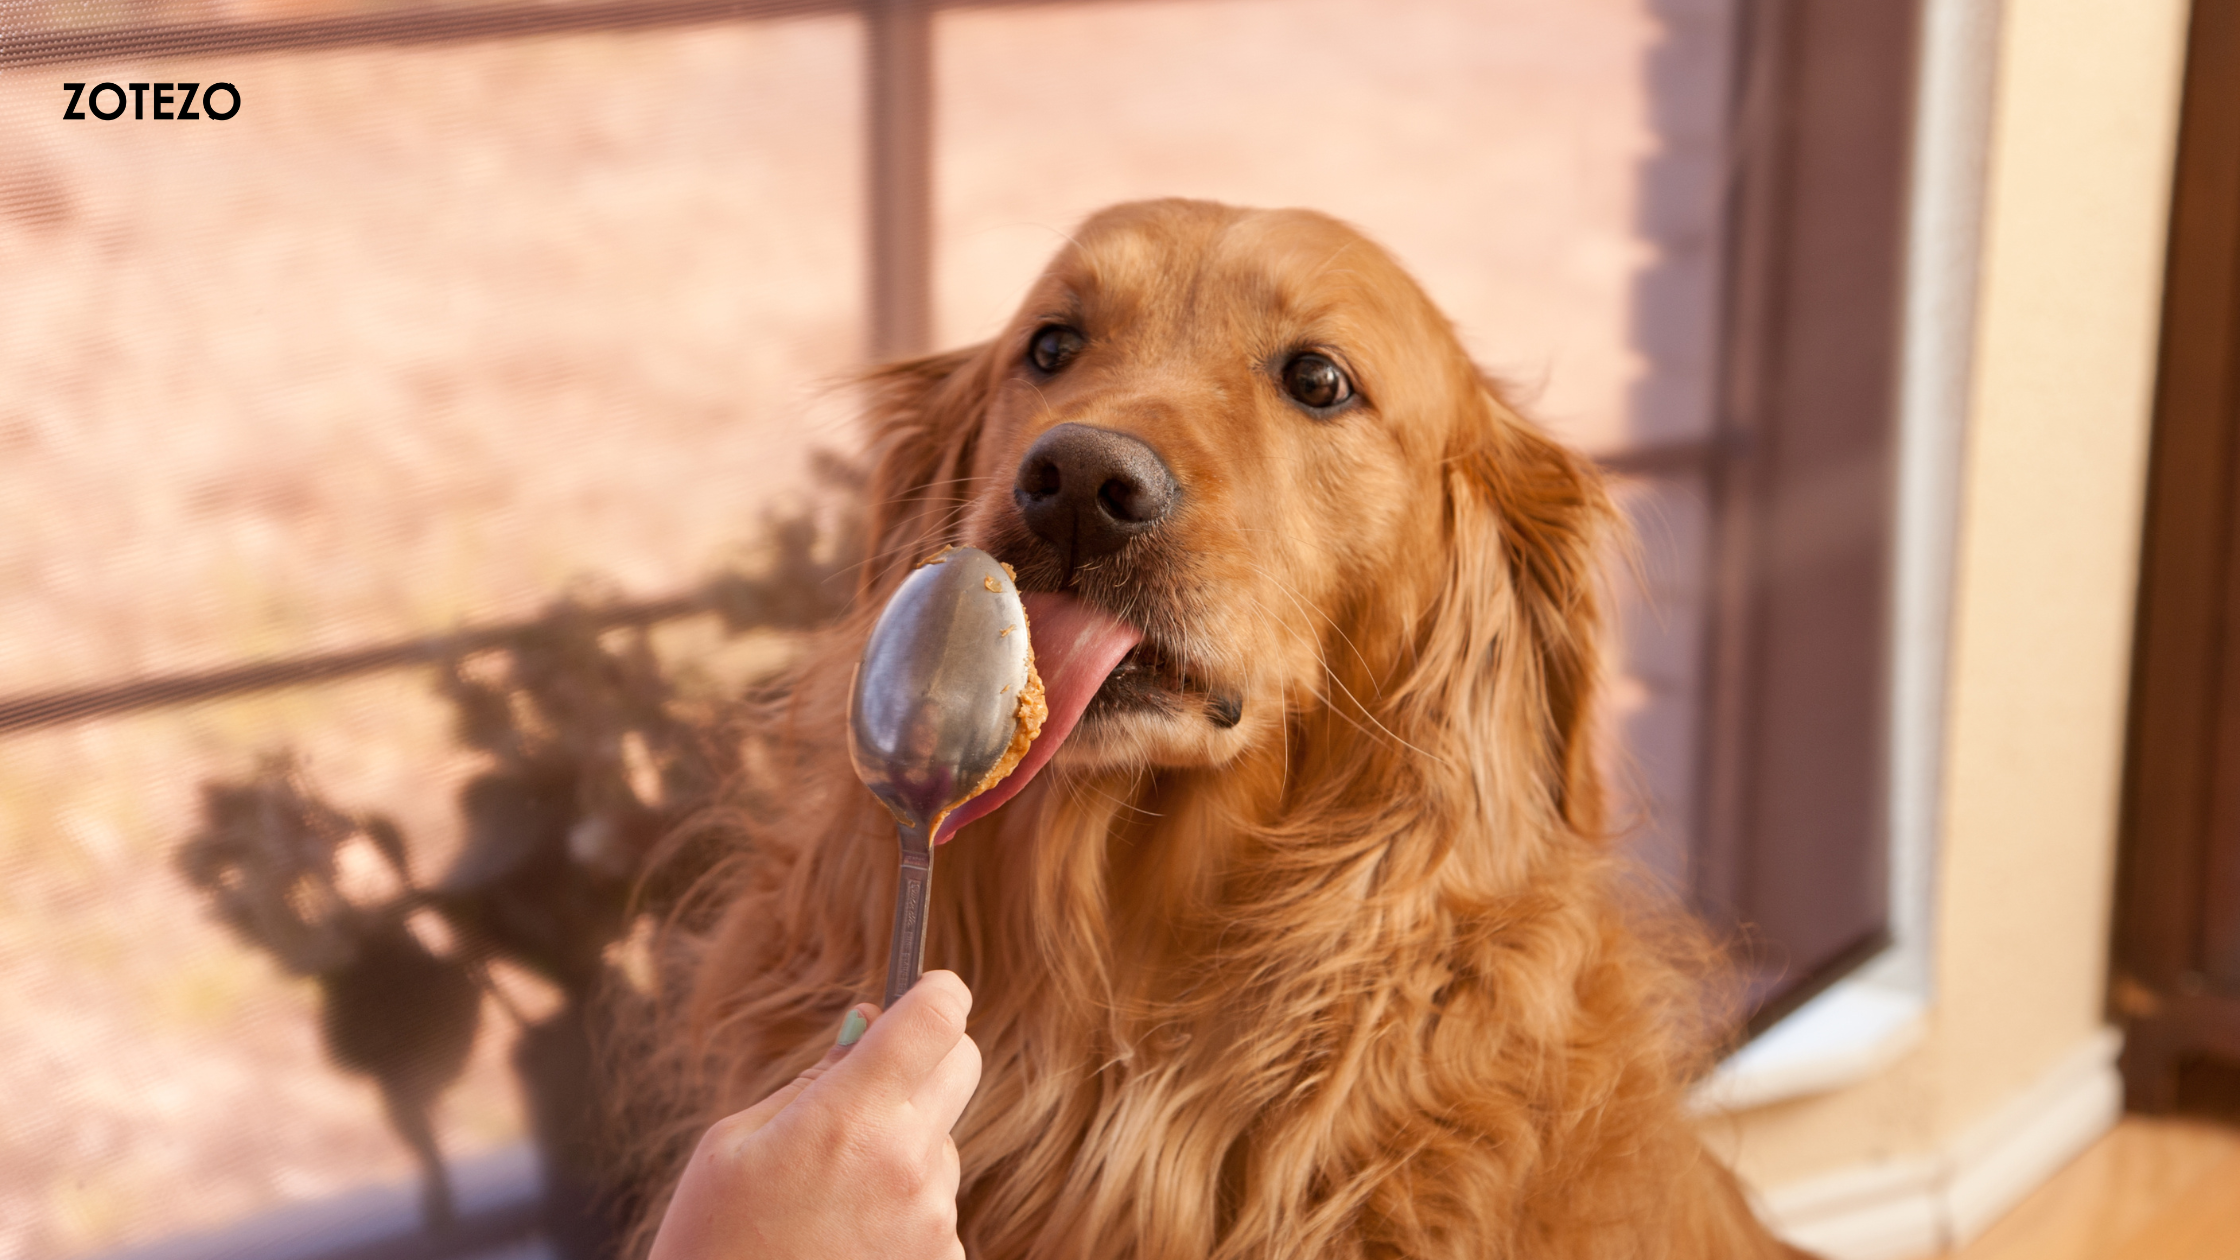 Peanut Butter For Dogs in Italy